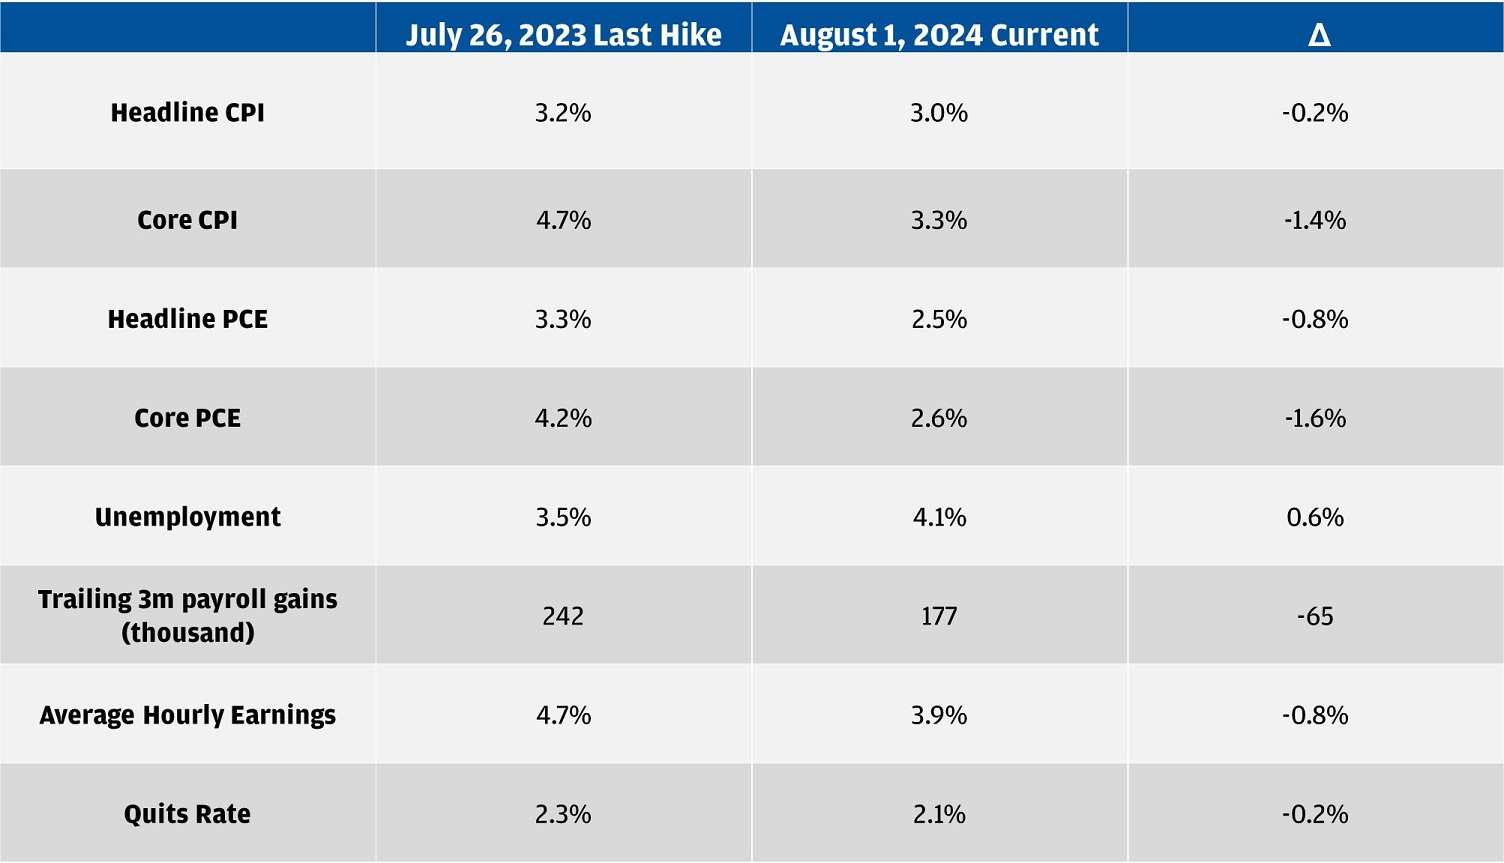 This table shows key economic indicators at the last Fed hike on July 26, 2023 and on August 1, 2024.